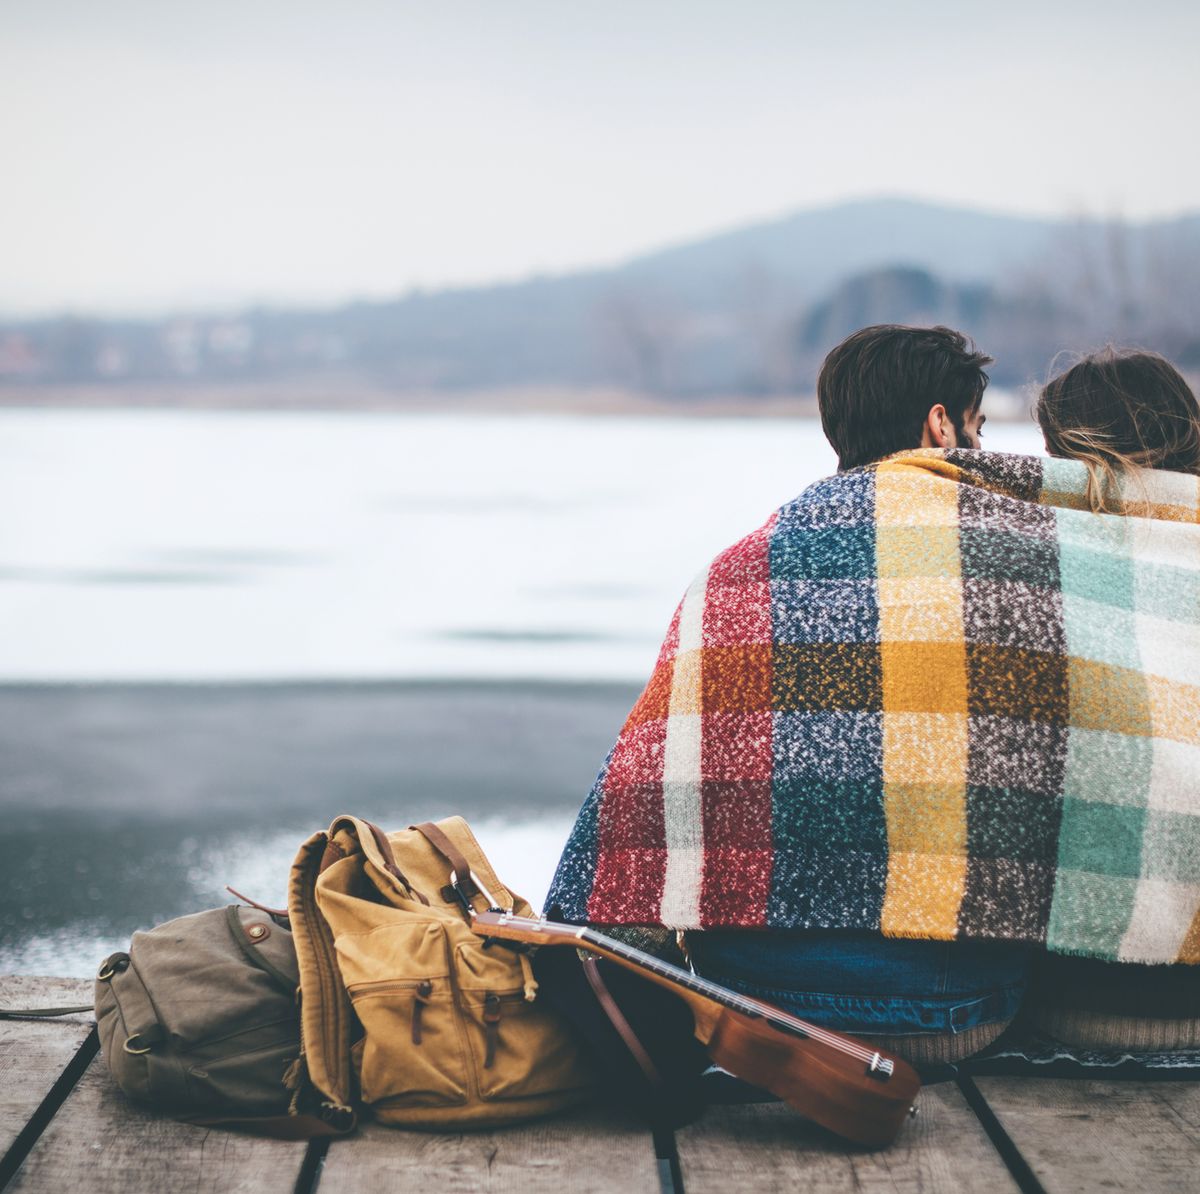 Indoor Winter Date Ideas Sure to Keep Couples Cozy